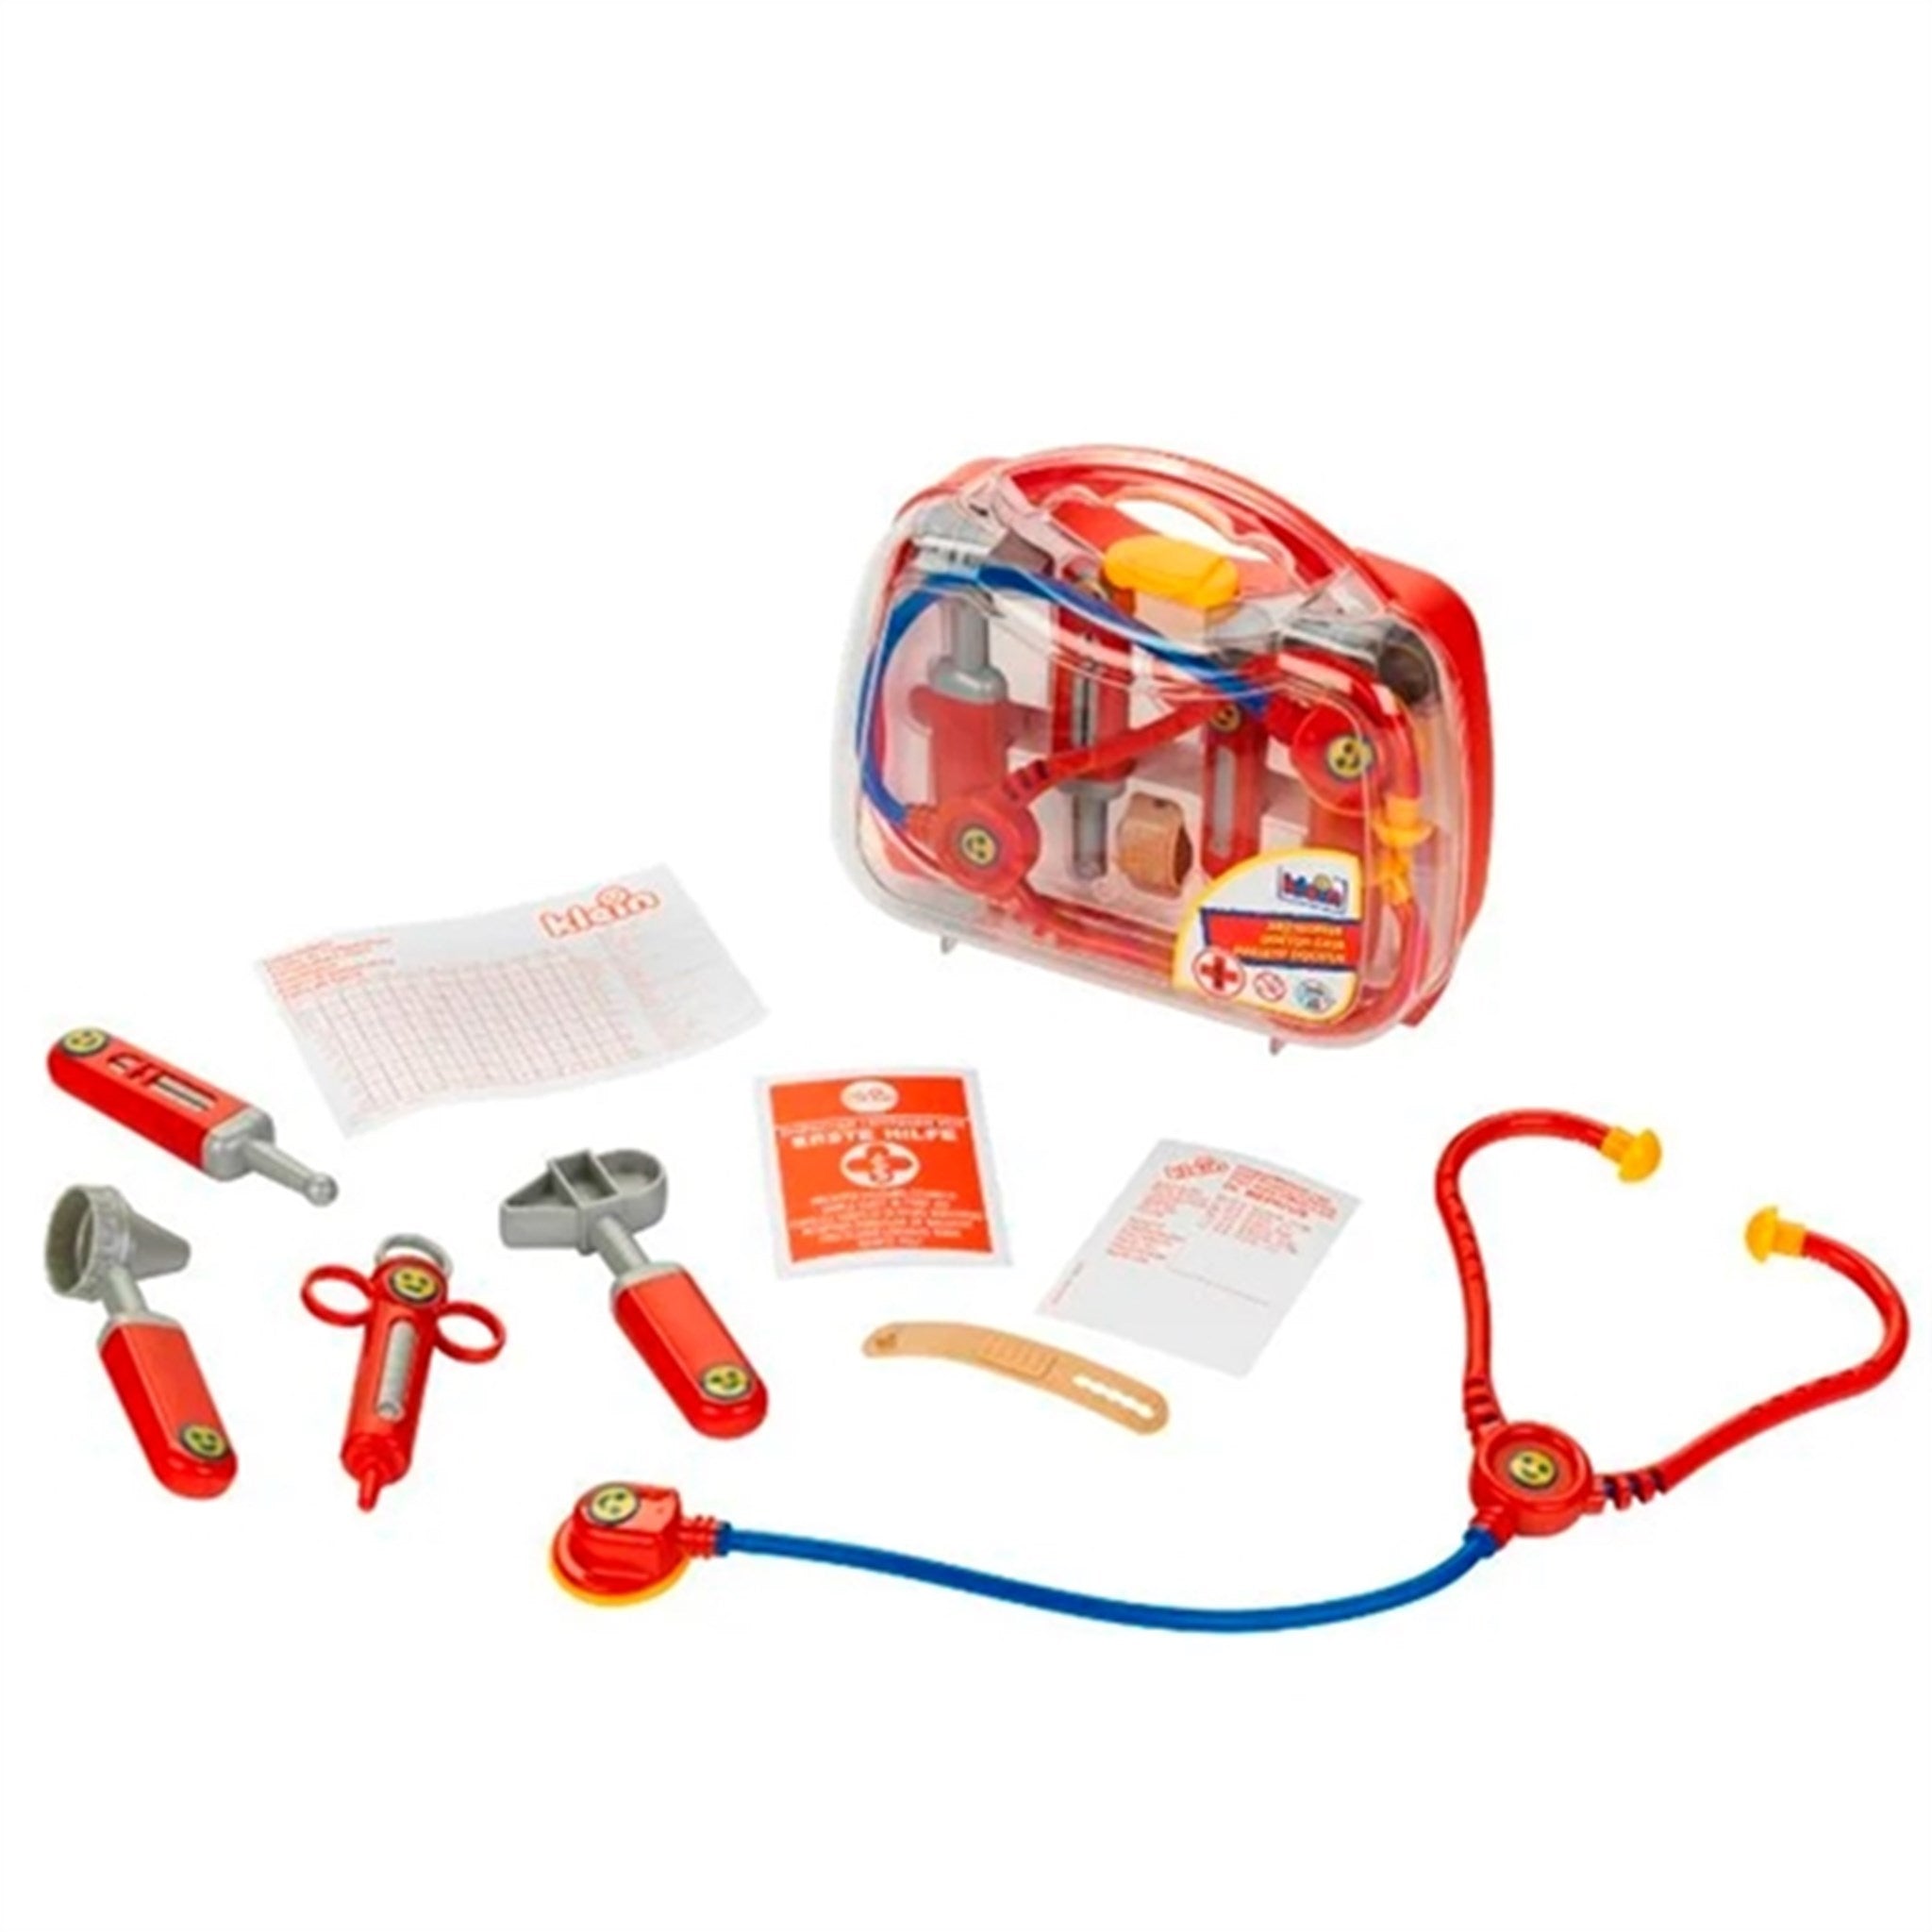 Klein Doctor's Kit With Stethoscope